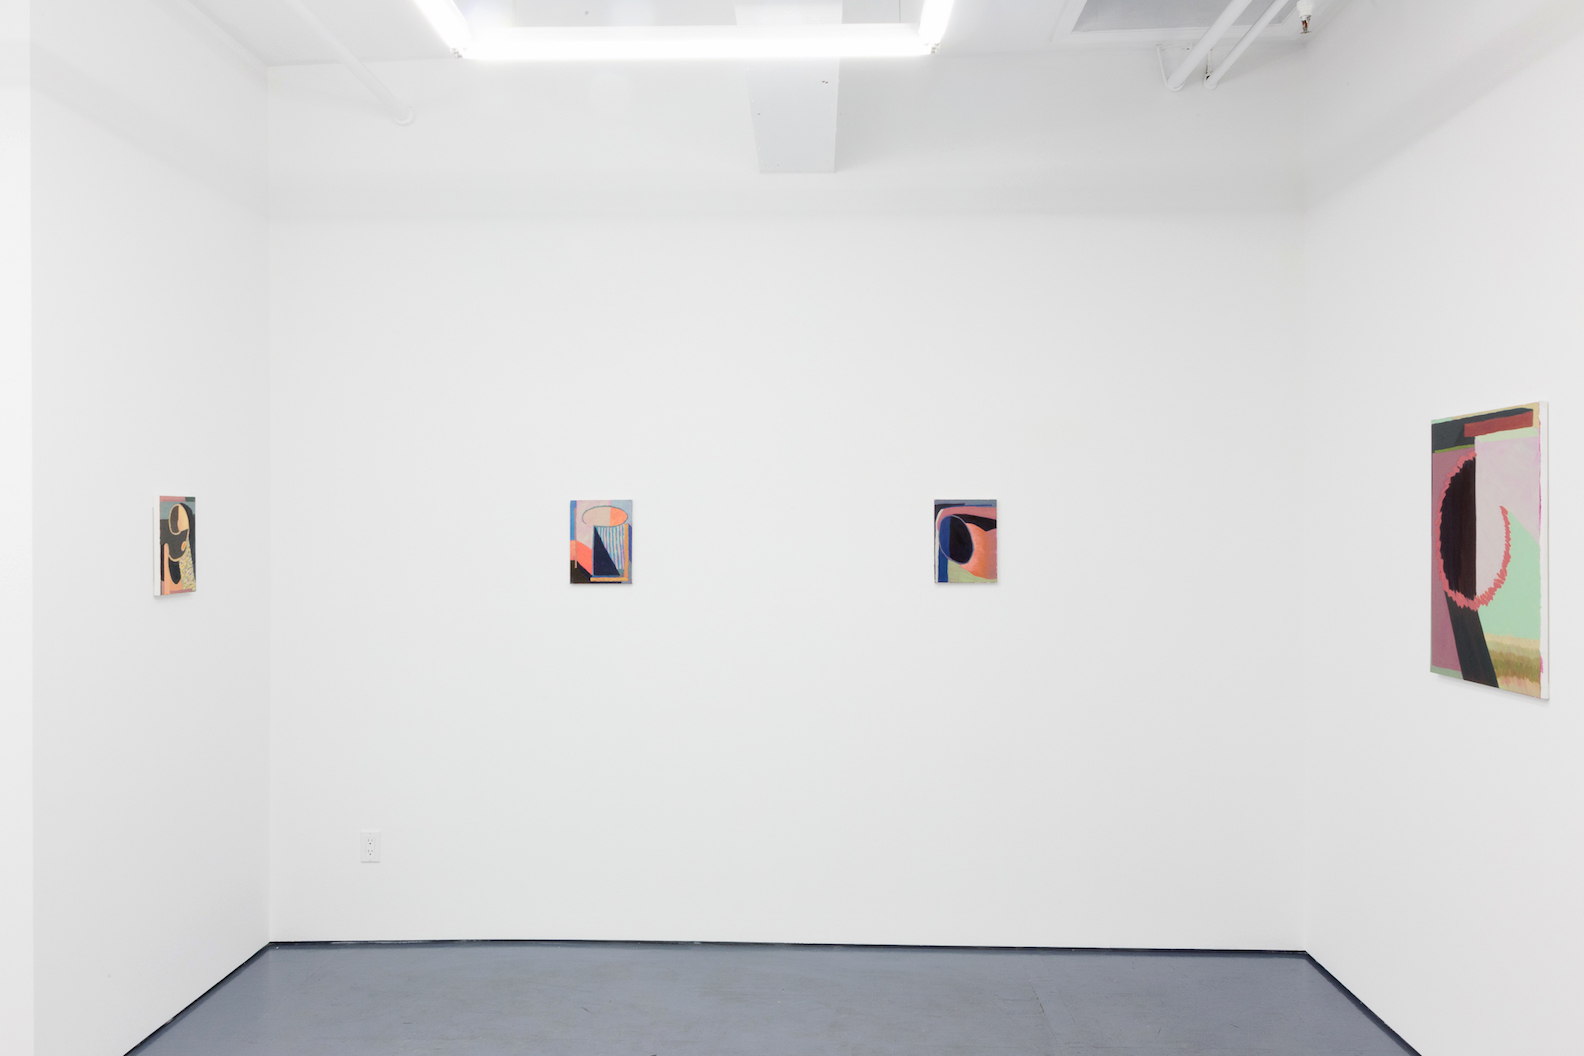  Installation view of the exhibition Armature by Liz Ainslie at Transmitter 